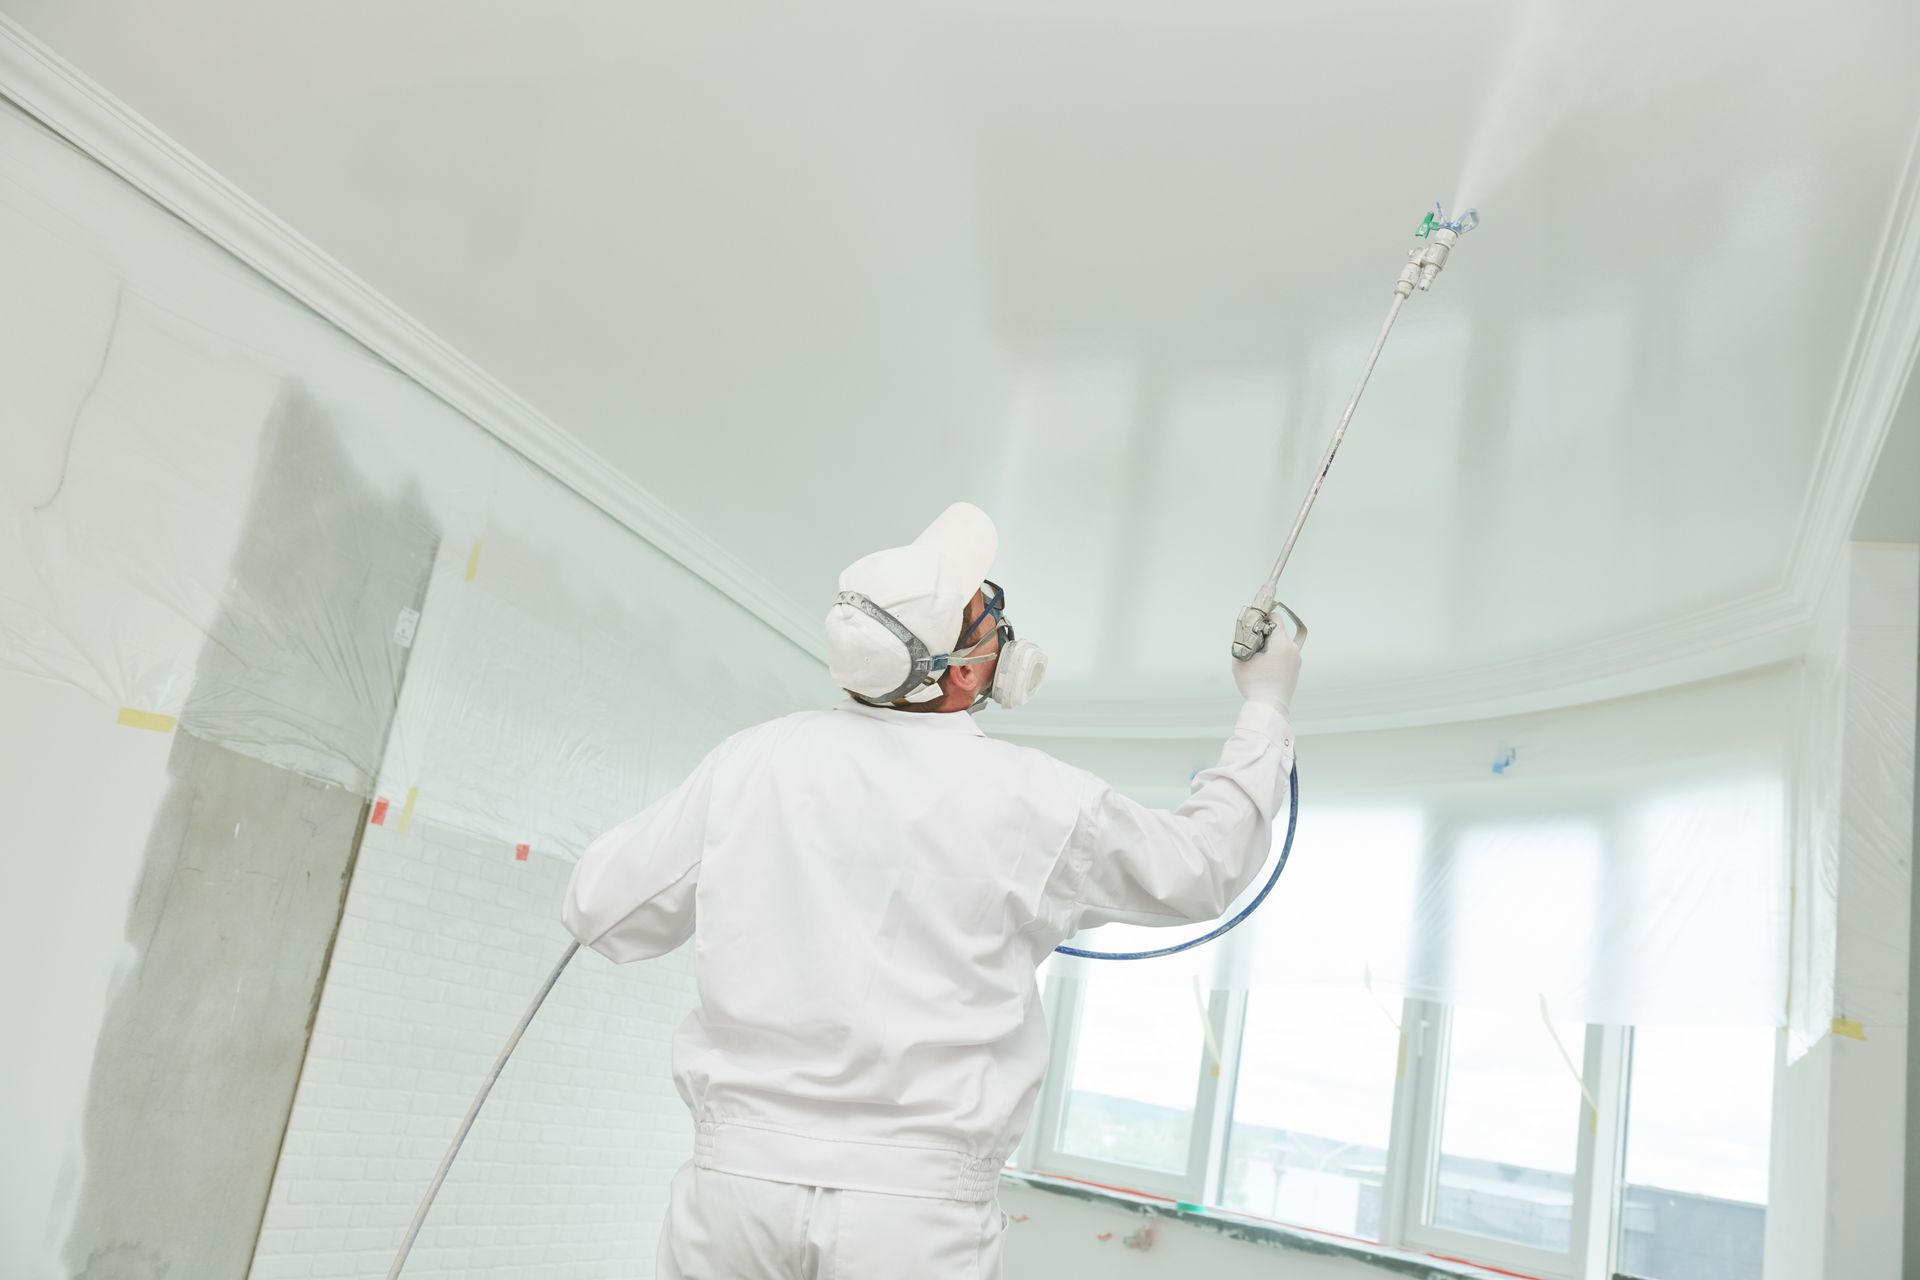 A painter using an airless painting sprayer to coat the ceiling surface in white paint.